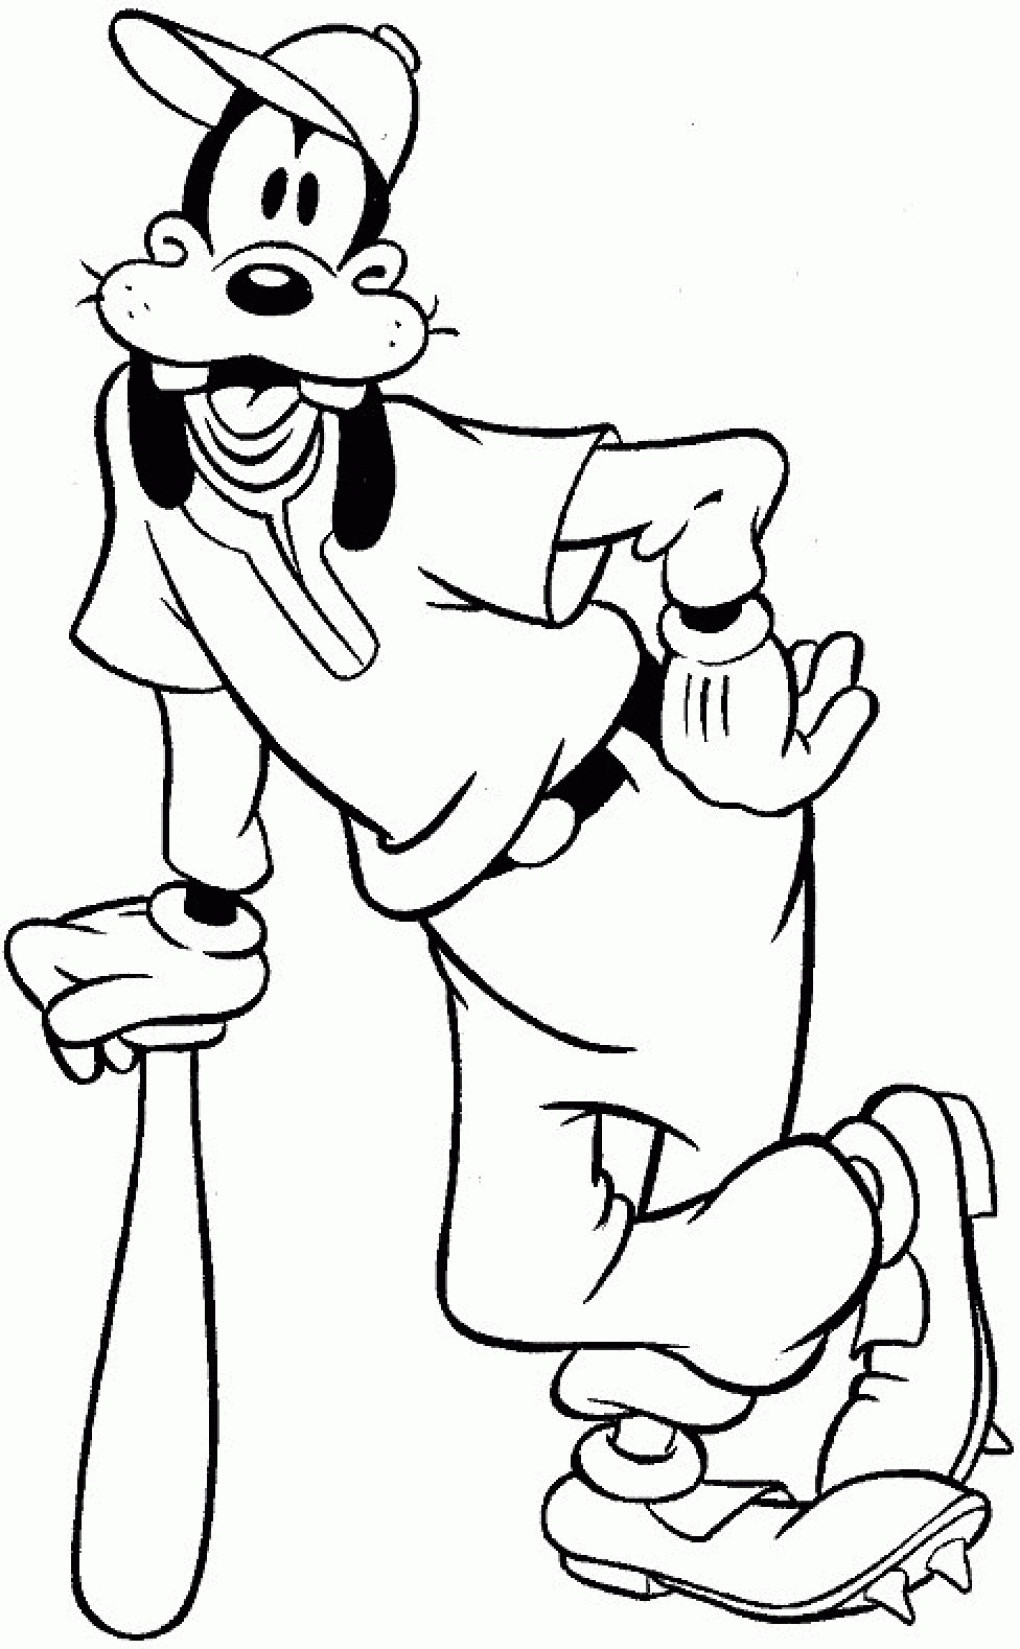 Kids Disney Coloring Pages
 Free Printable Goofy Coloring Pages For Kids